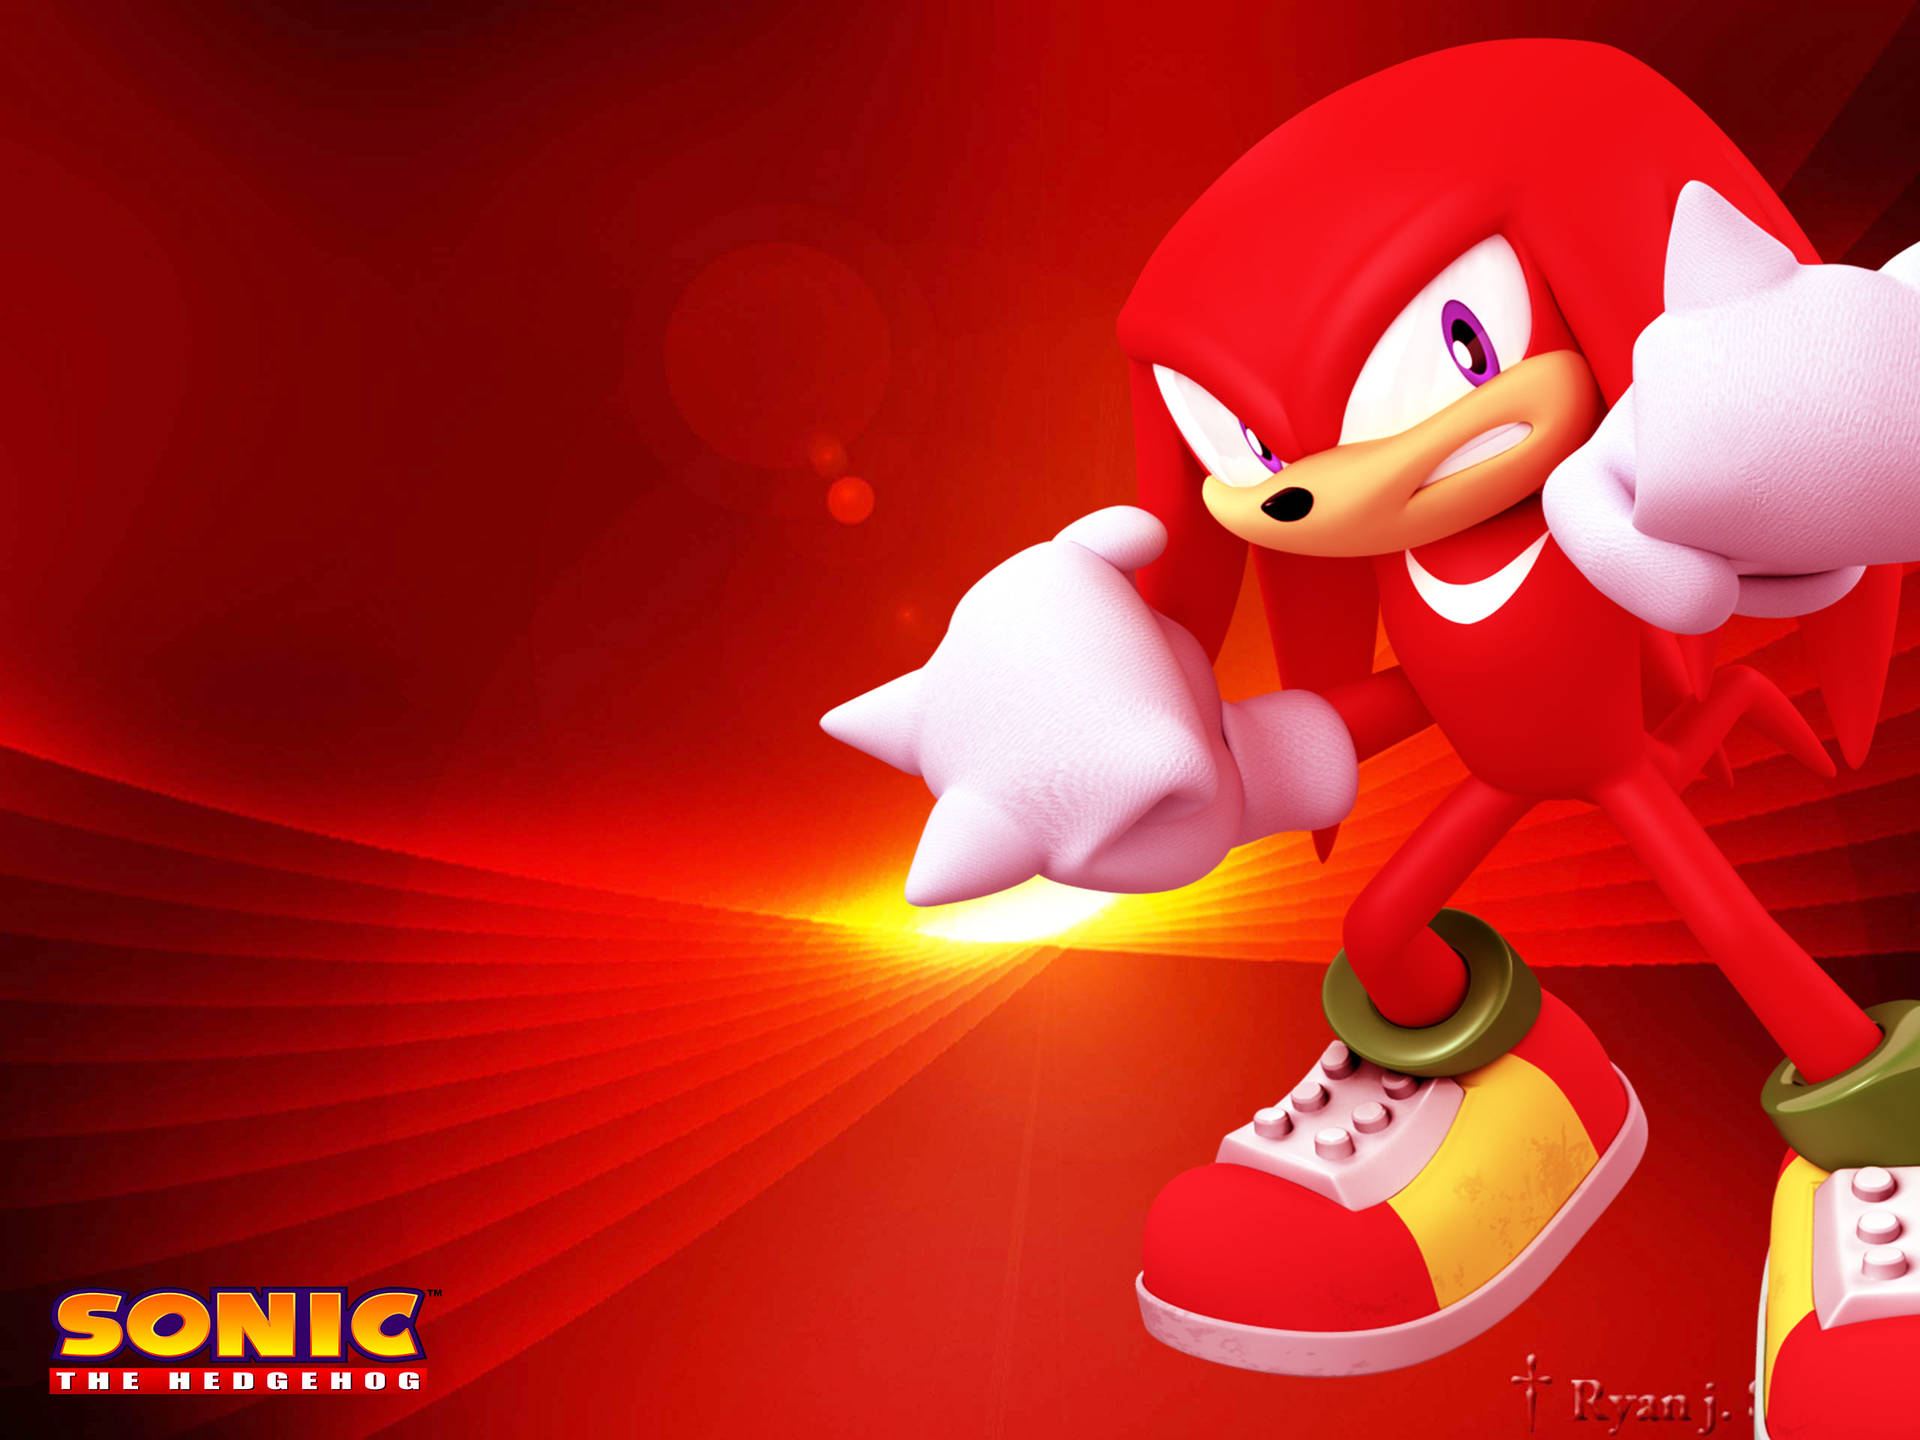 Angry Knuckles The Echidna In Intense Action Background